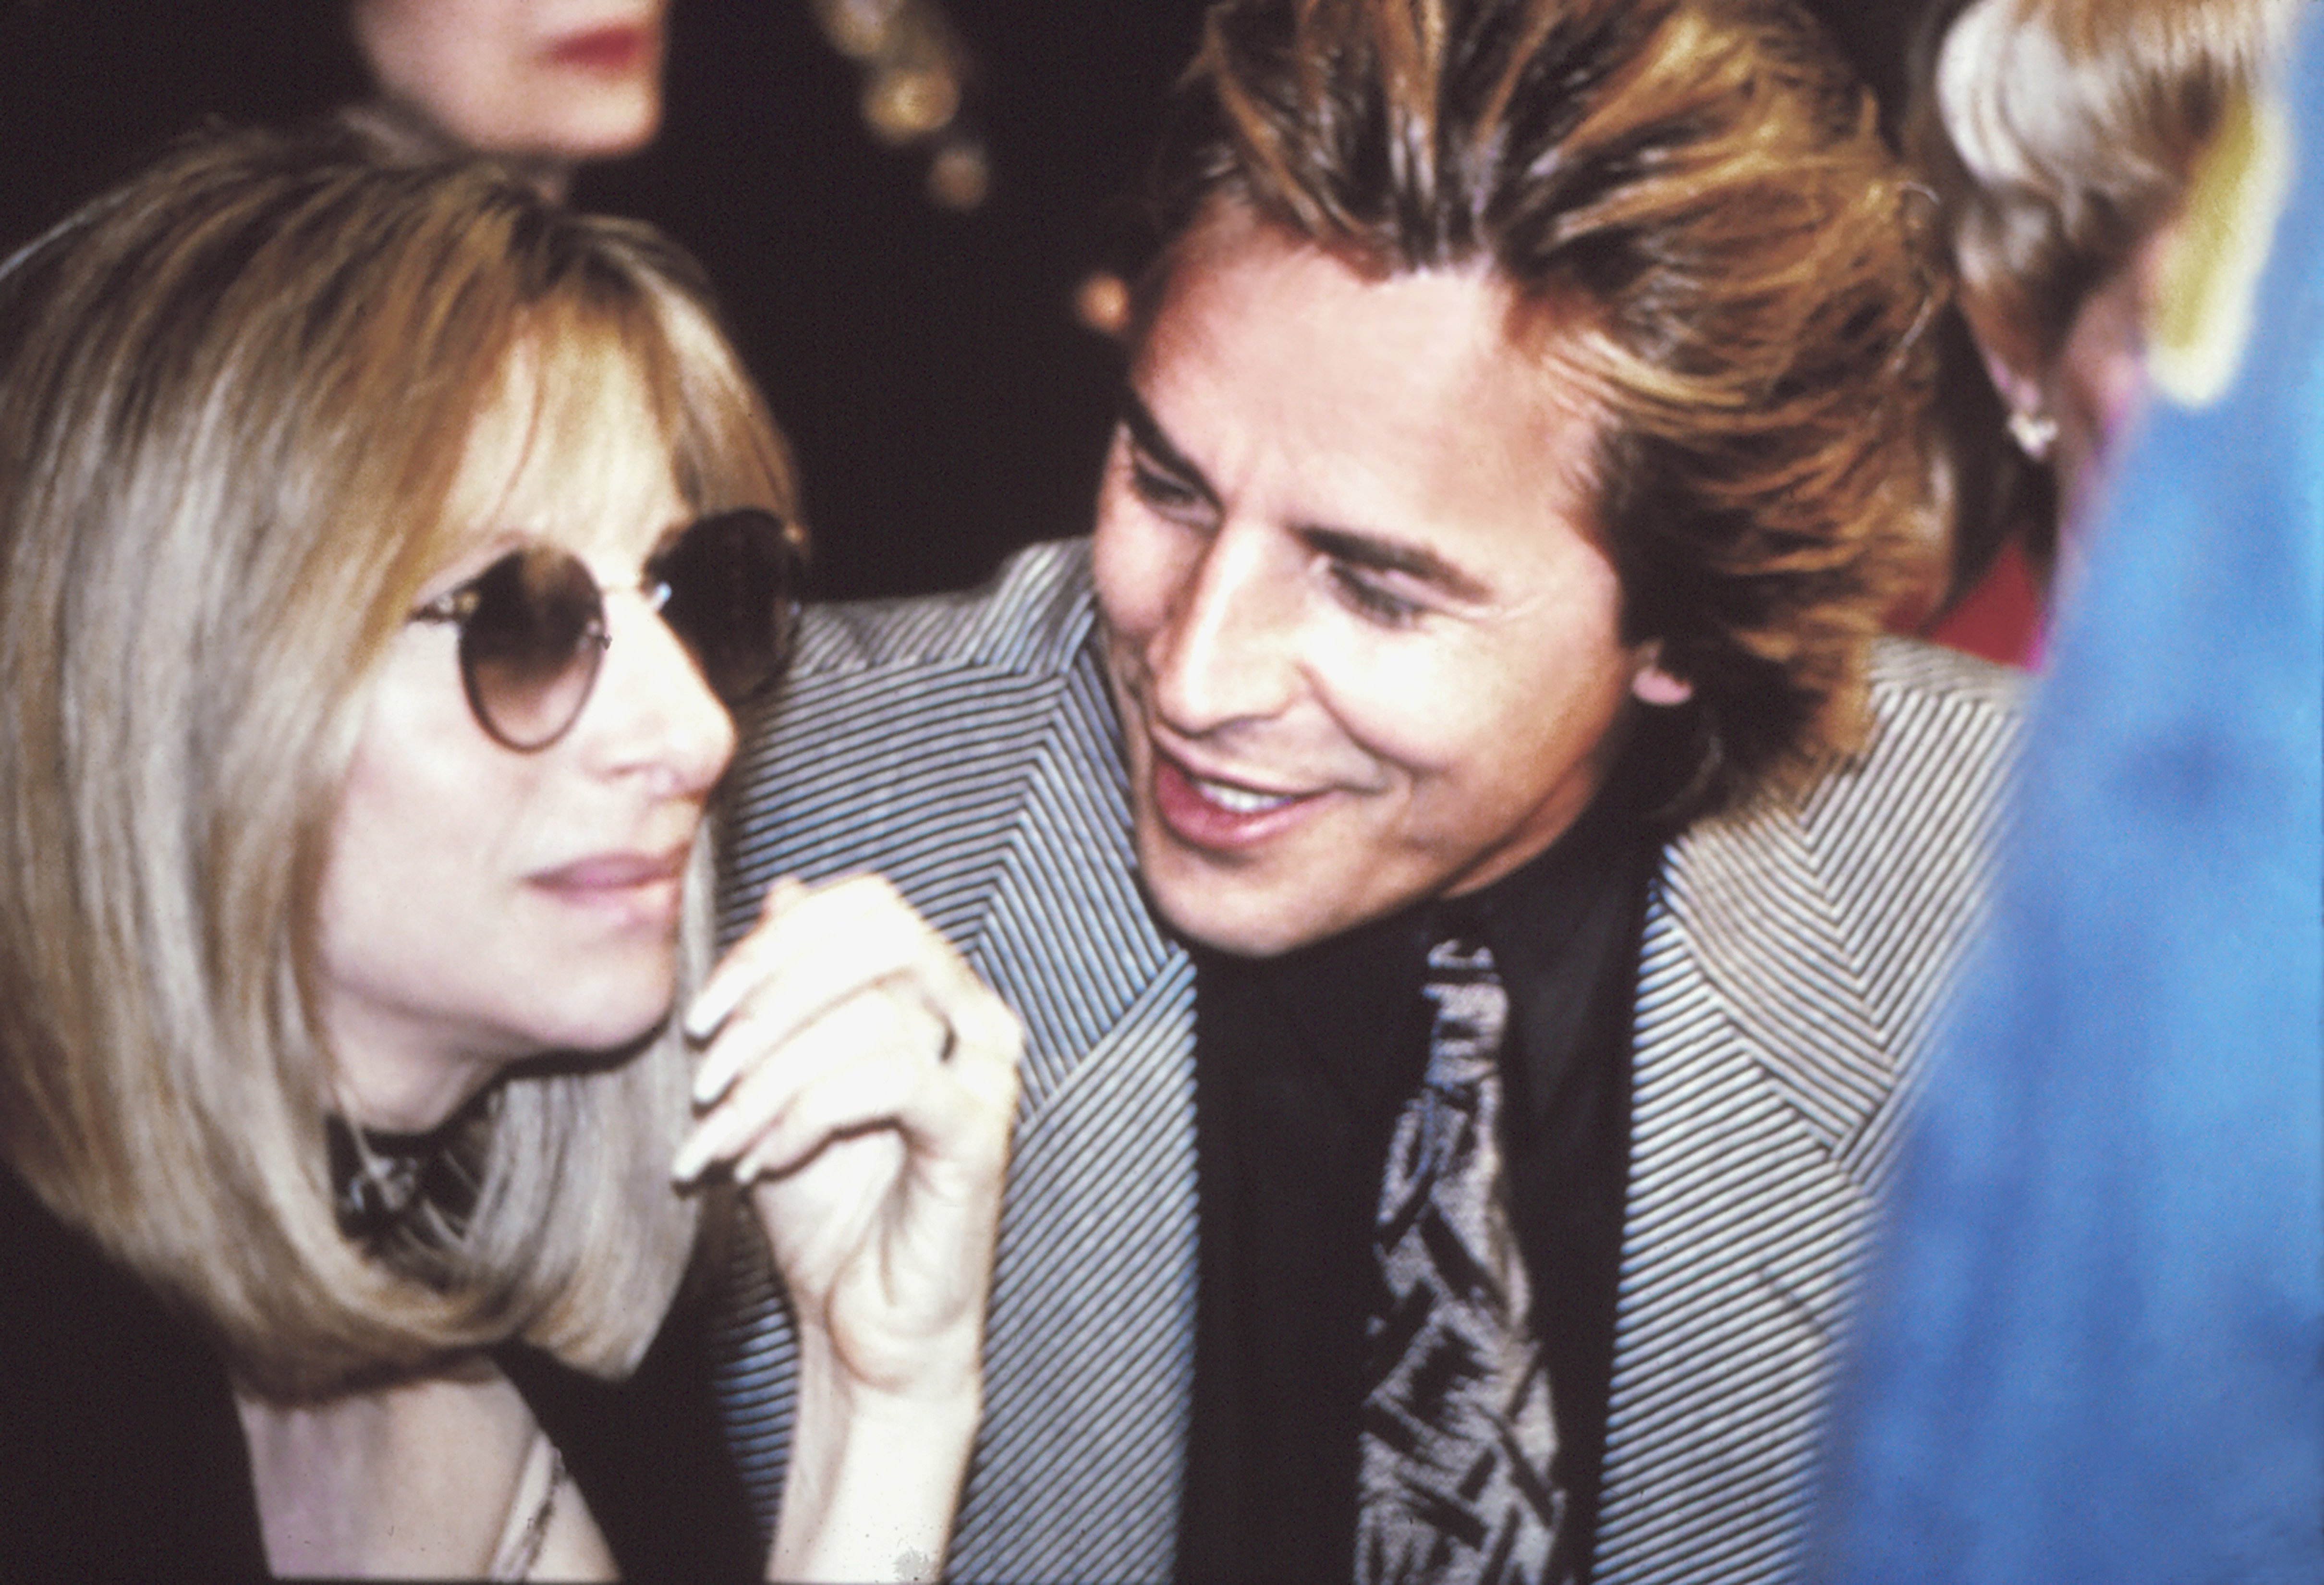 Barbra Streisand and Actor Don Johnson ringside at Tyson vs Holmes Convention Hall in Atlantic City. | Source: Getty Images